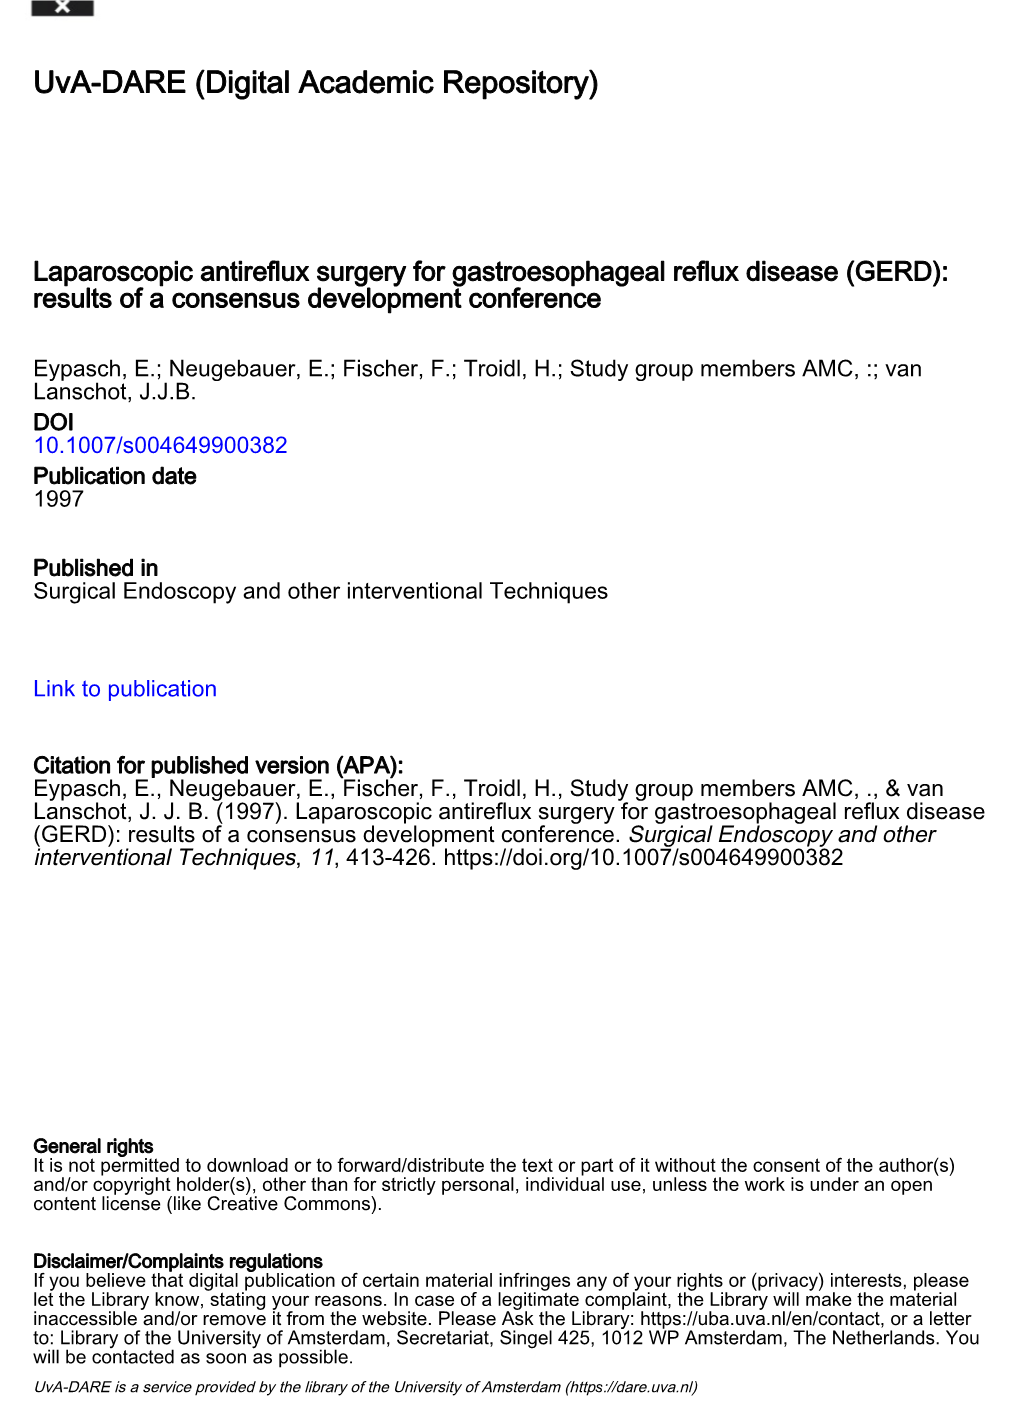 Laparoscopic Antireflux Surgery for Gastroesophageal Reflux Disease (GERD) Results of a Consensus Development Conference